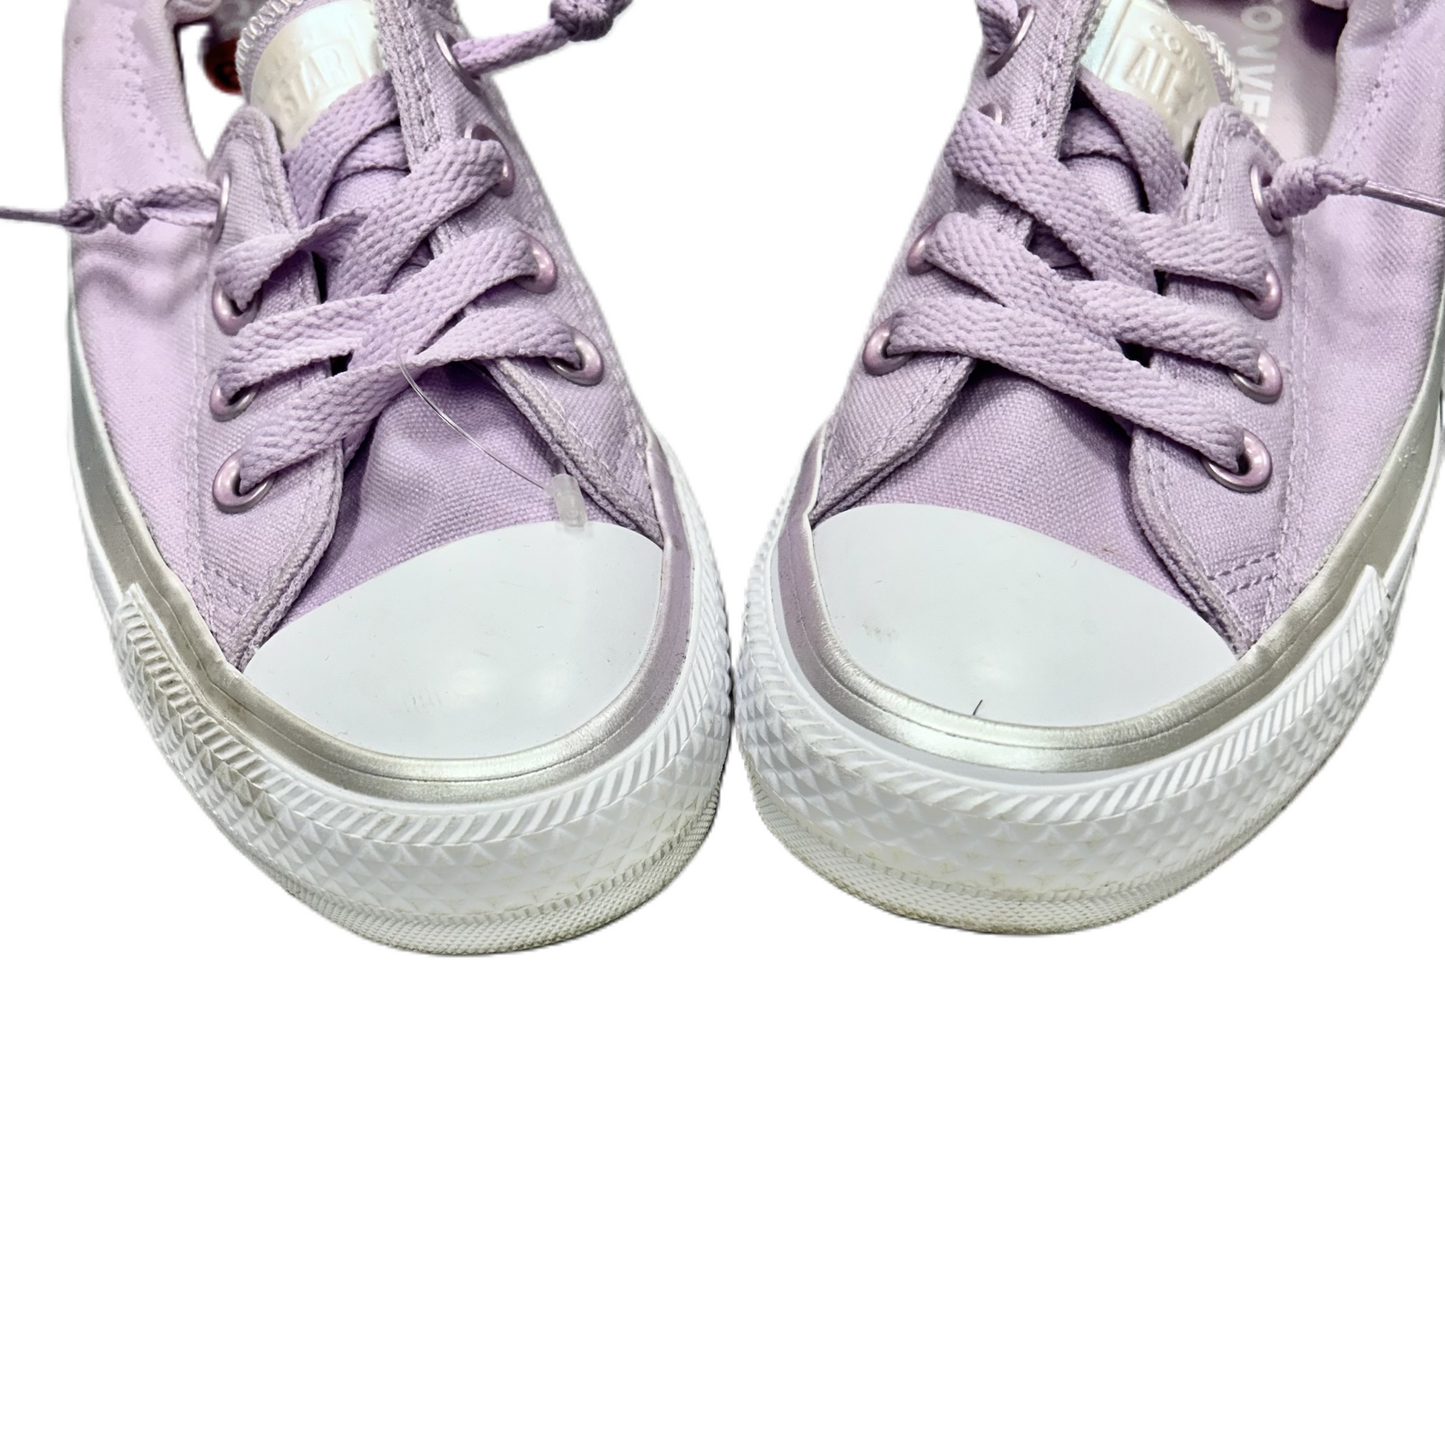 Purple Shoes Sneakers By Converse, Size: 6.5